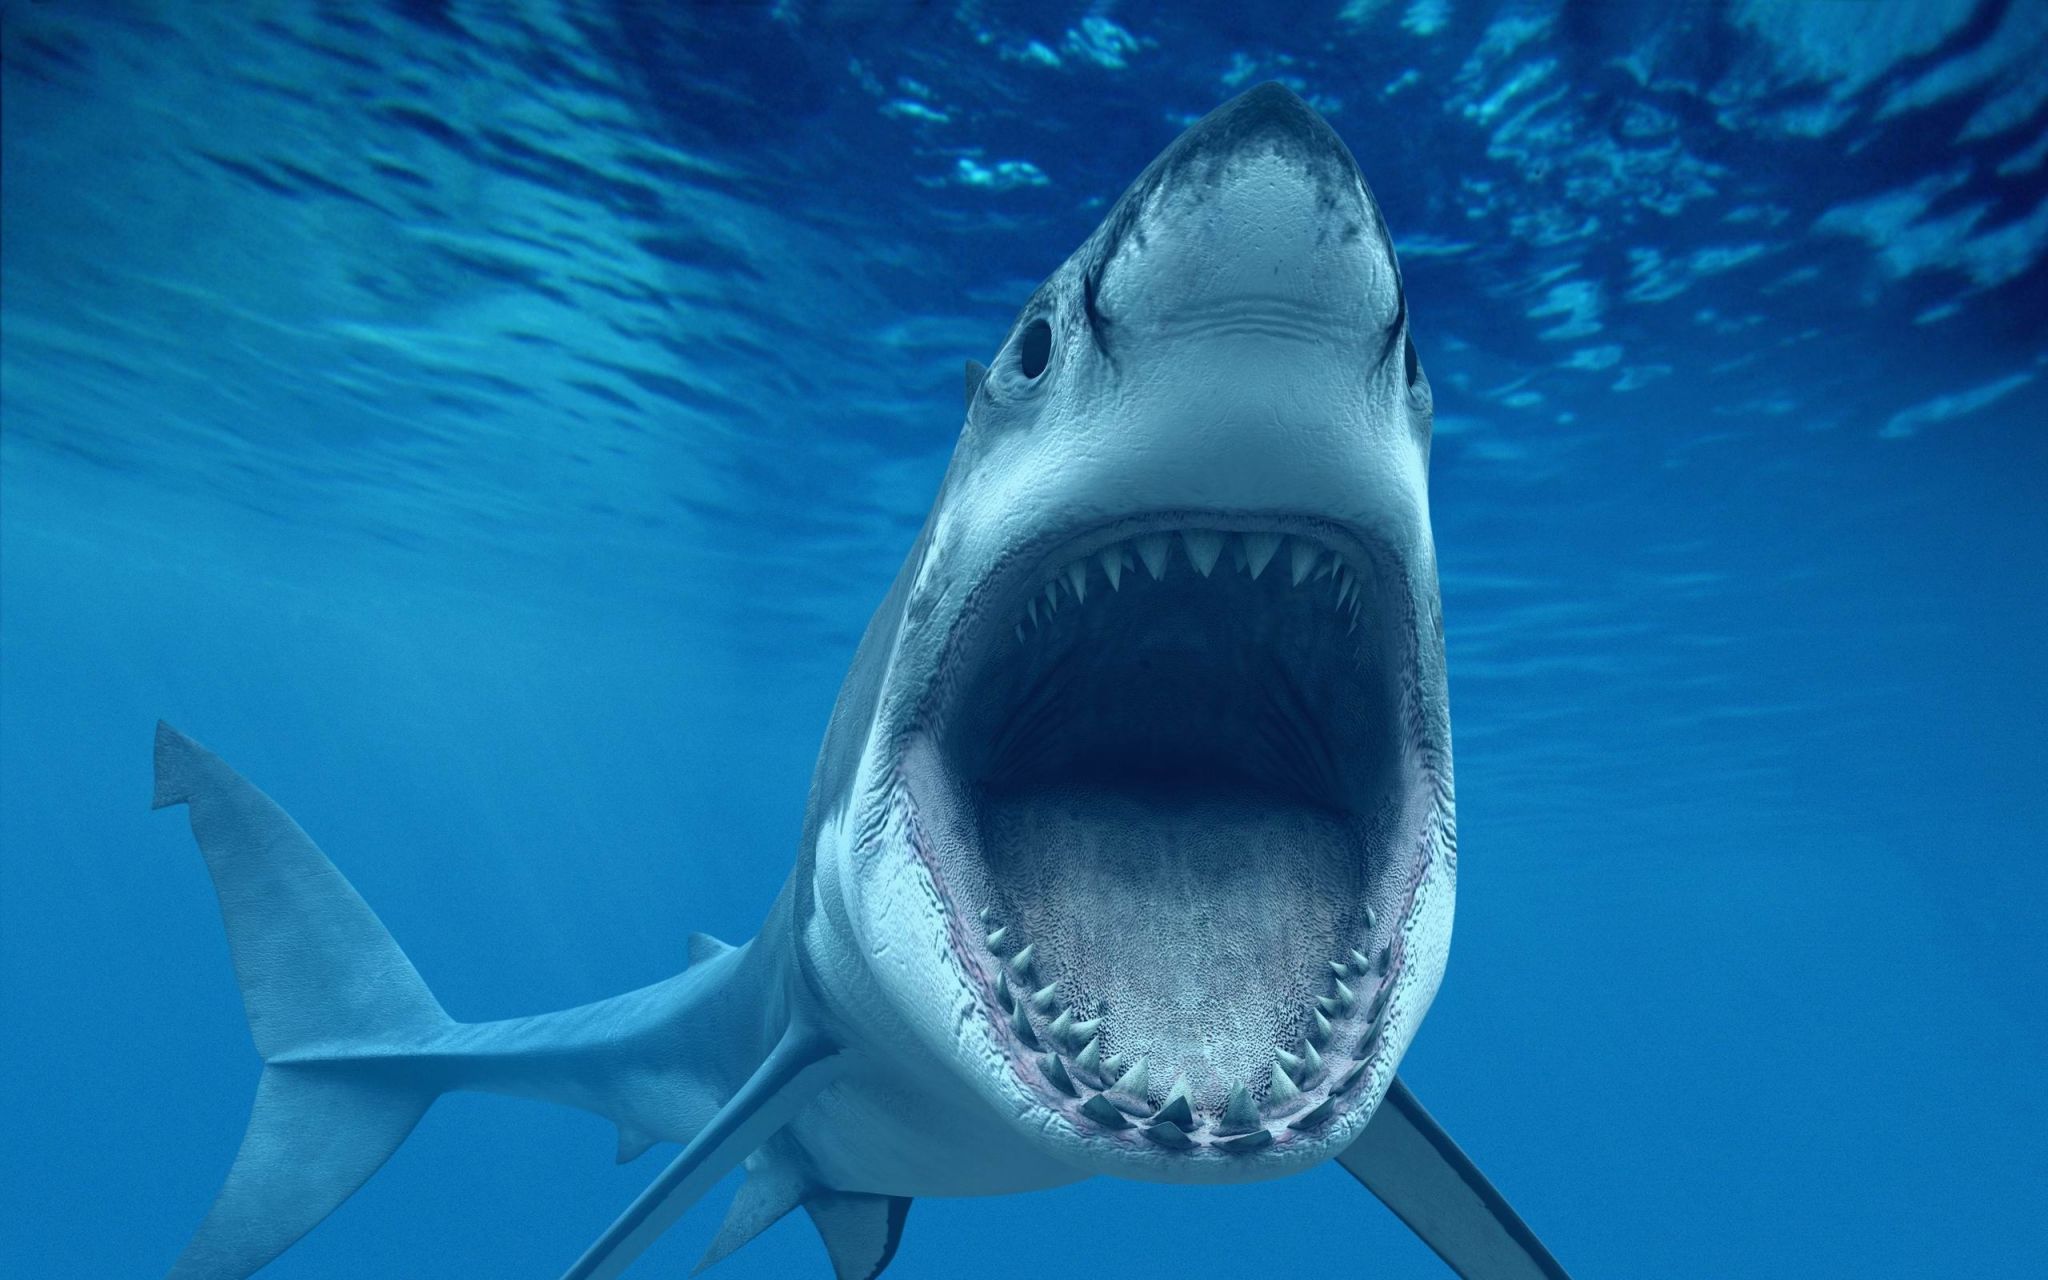 Shark HD Wallpaper 1080p High Quality With Image